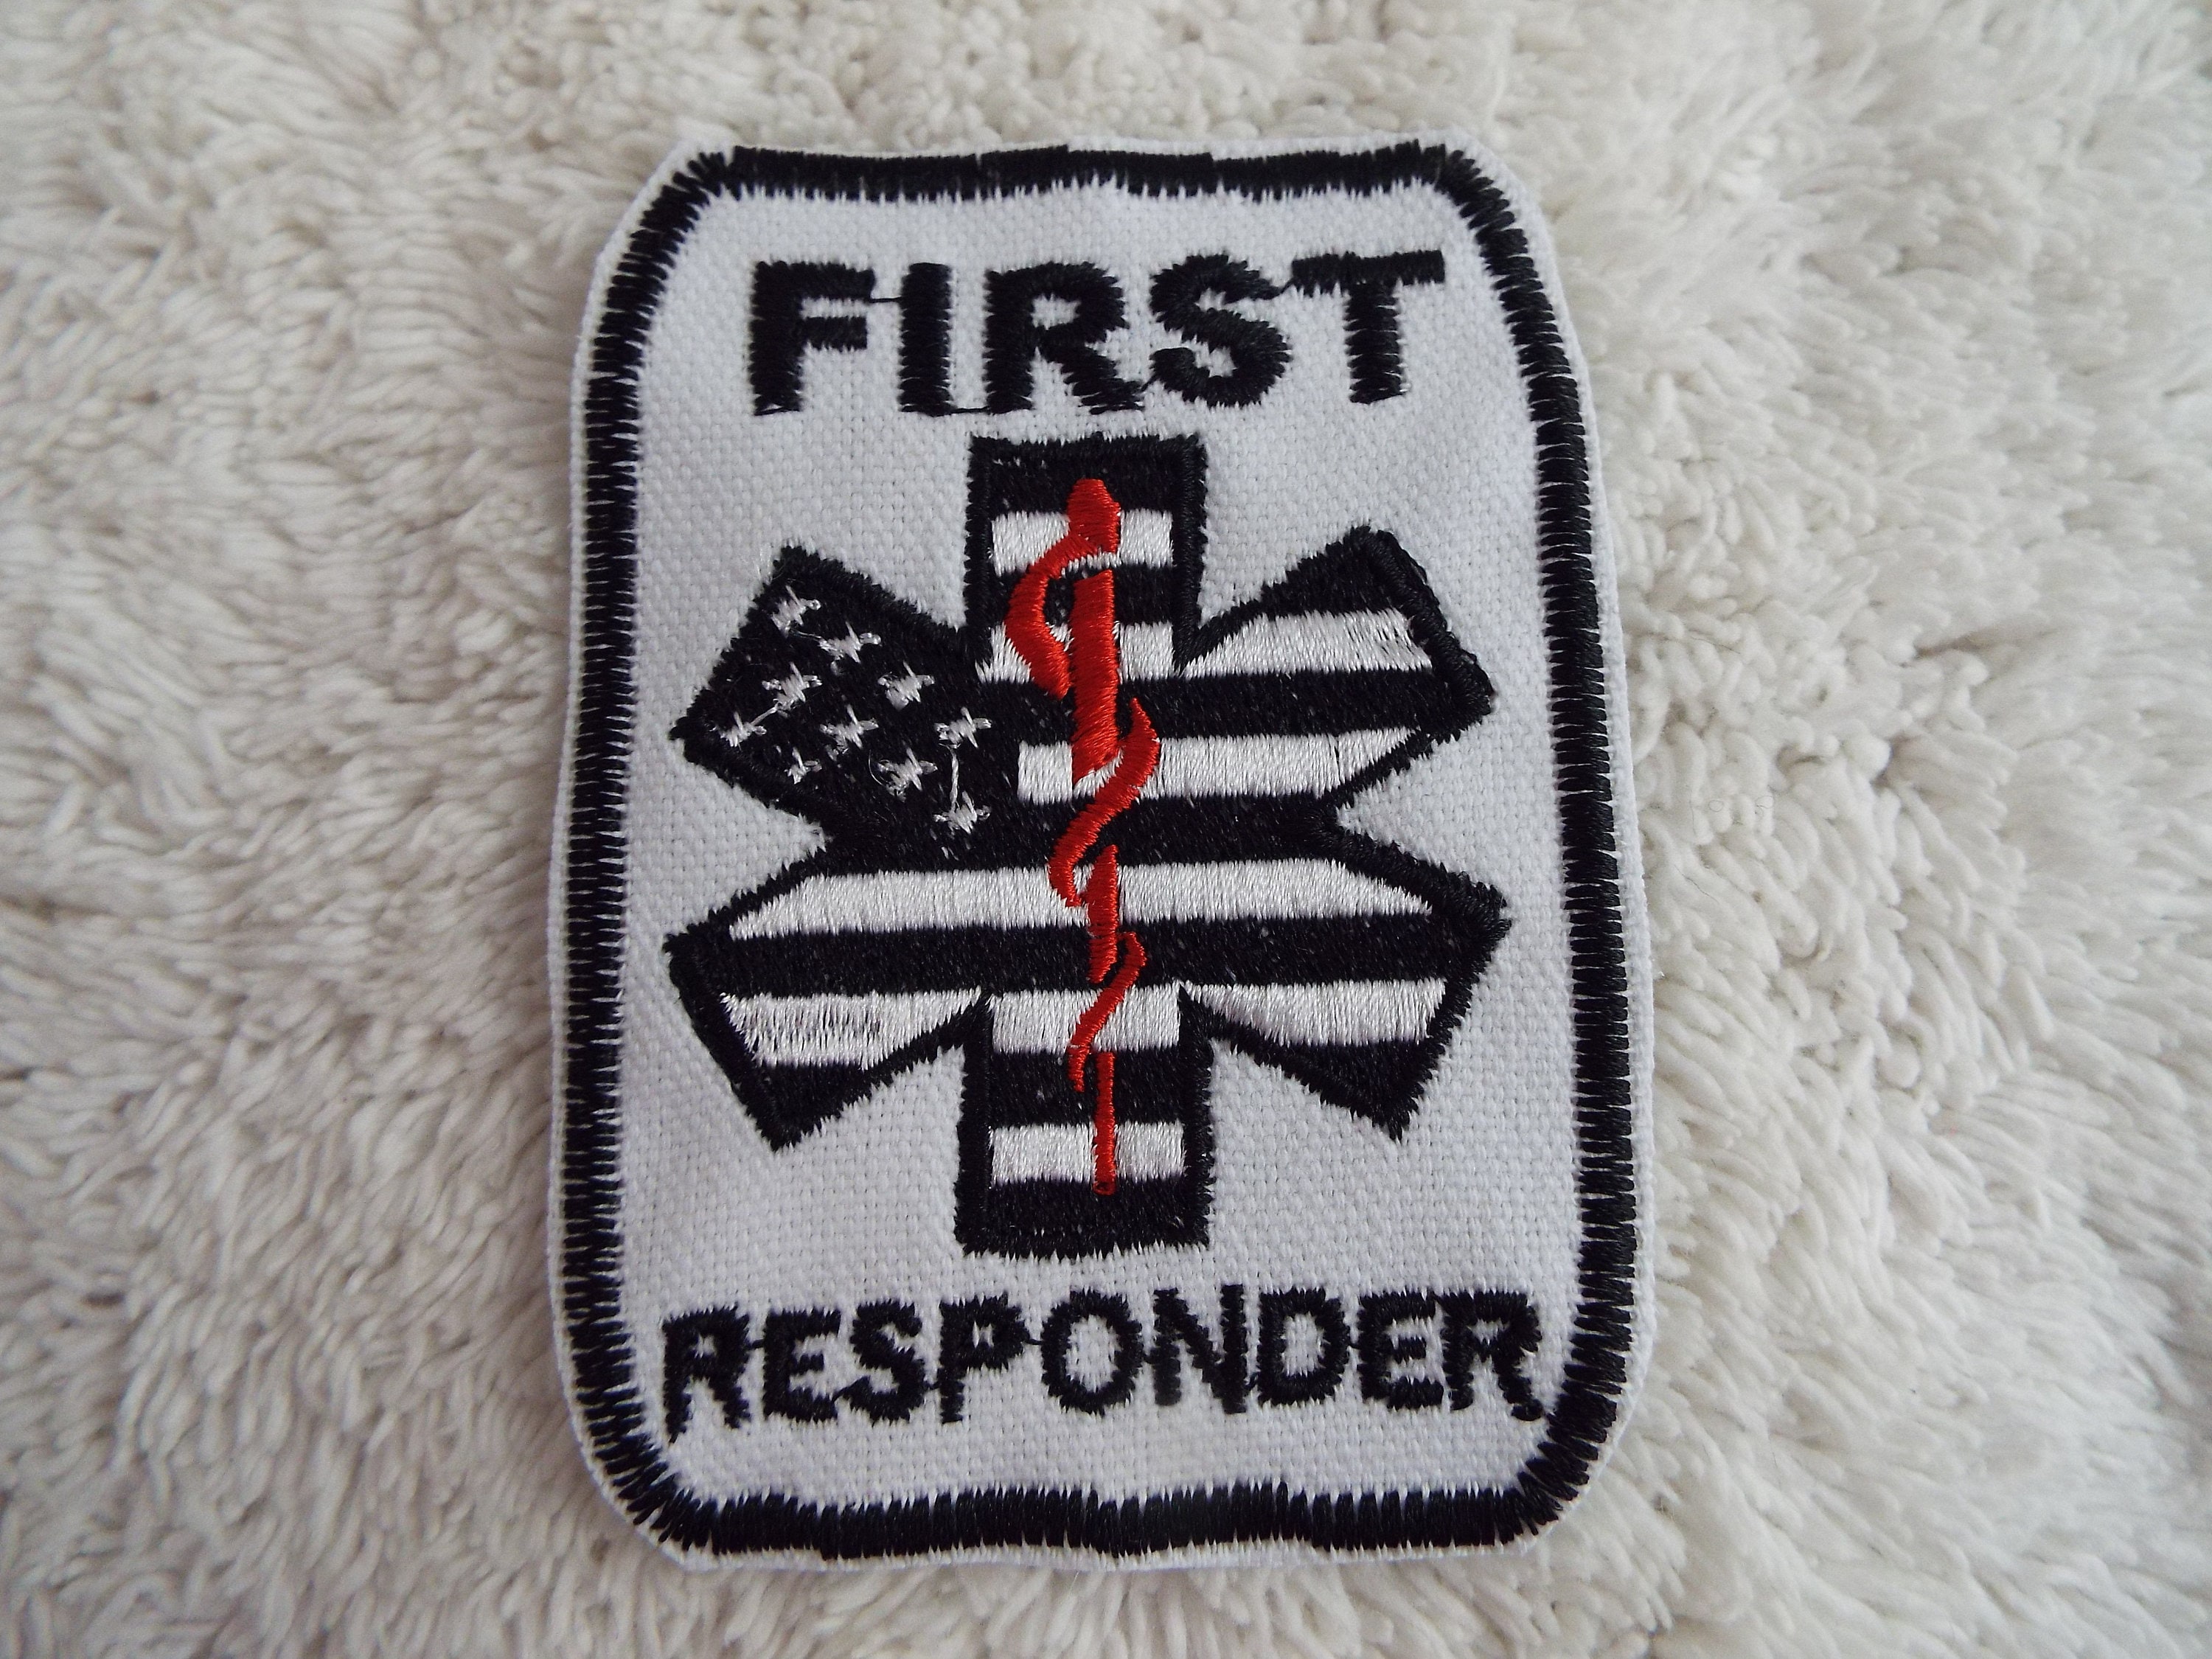 First Responders Get Free Patch with Vest Purchase